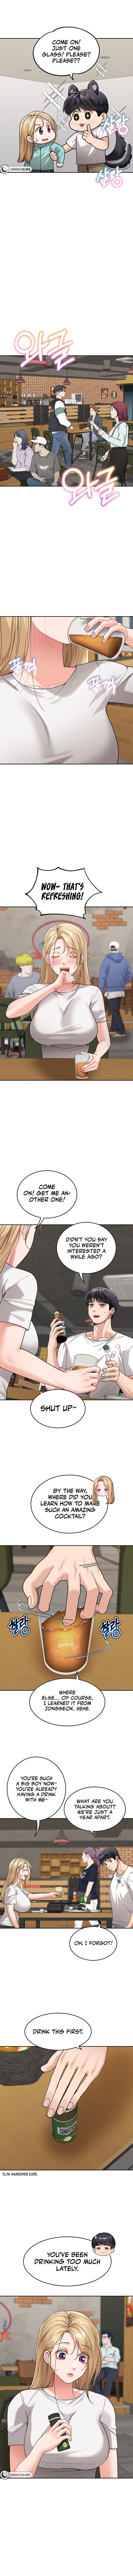 is-it-your-mother-or-sister-chap-31-4